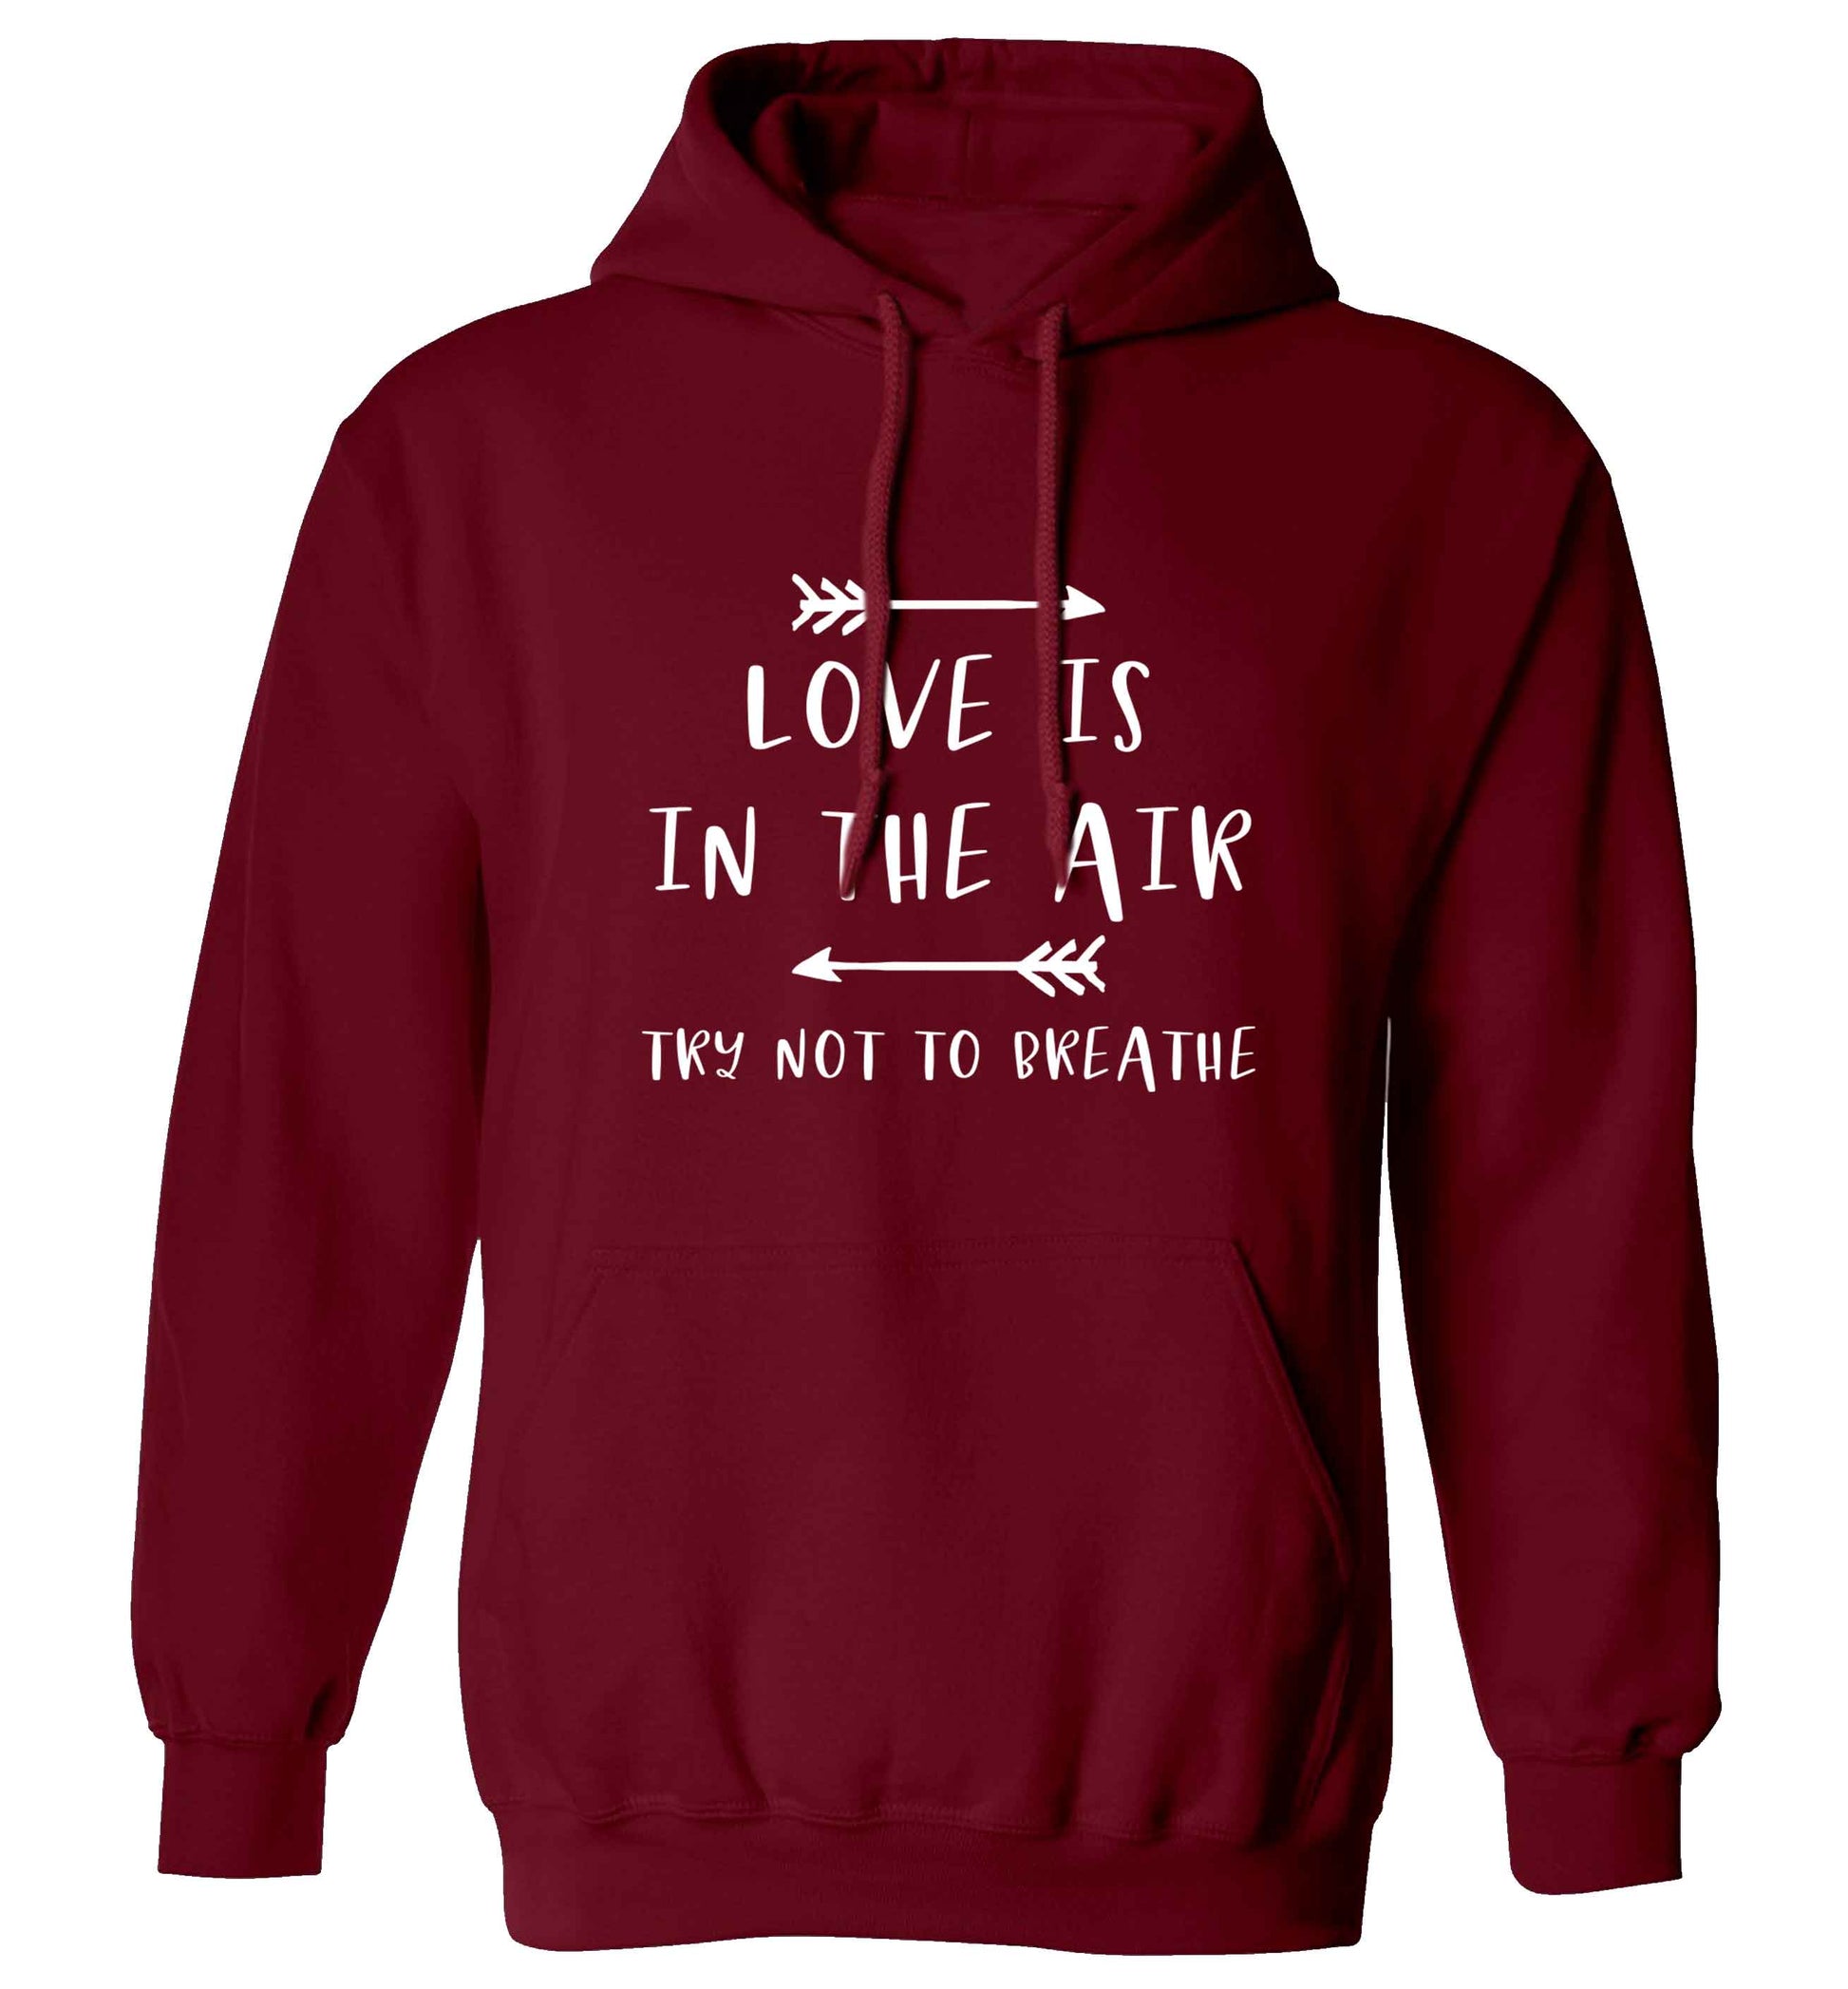 Love is in the air try not to breathe adults unisex maroon hoodie 2XL